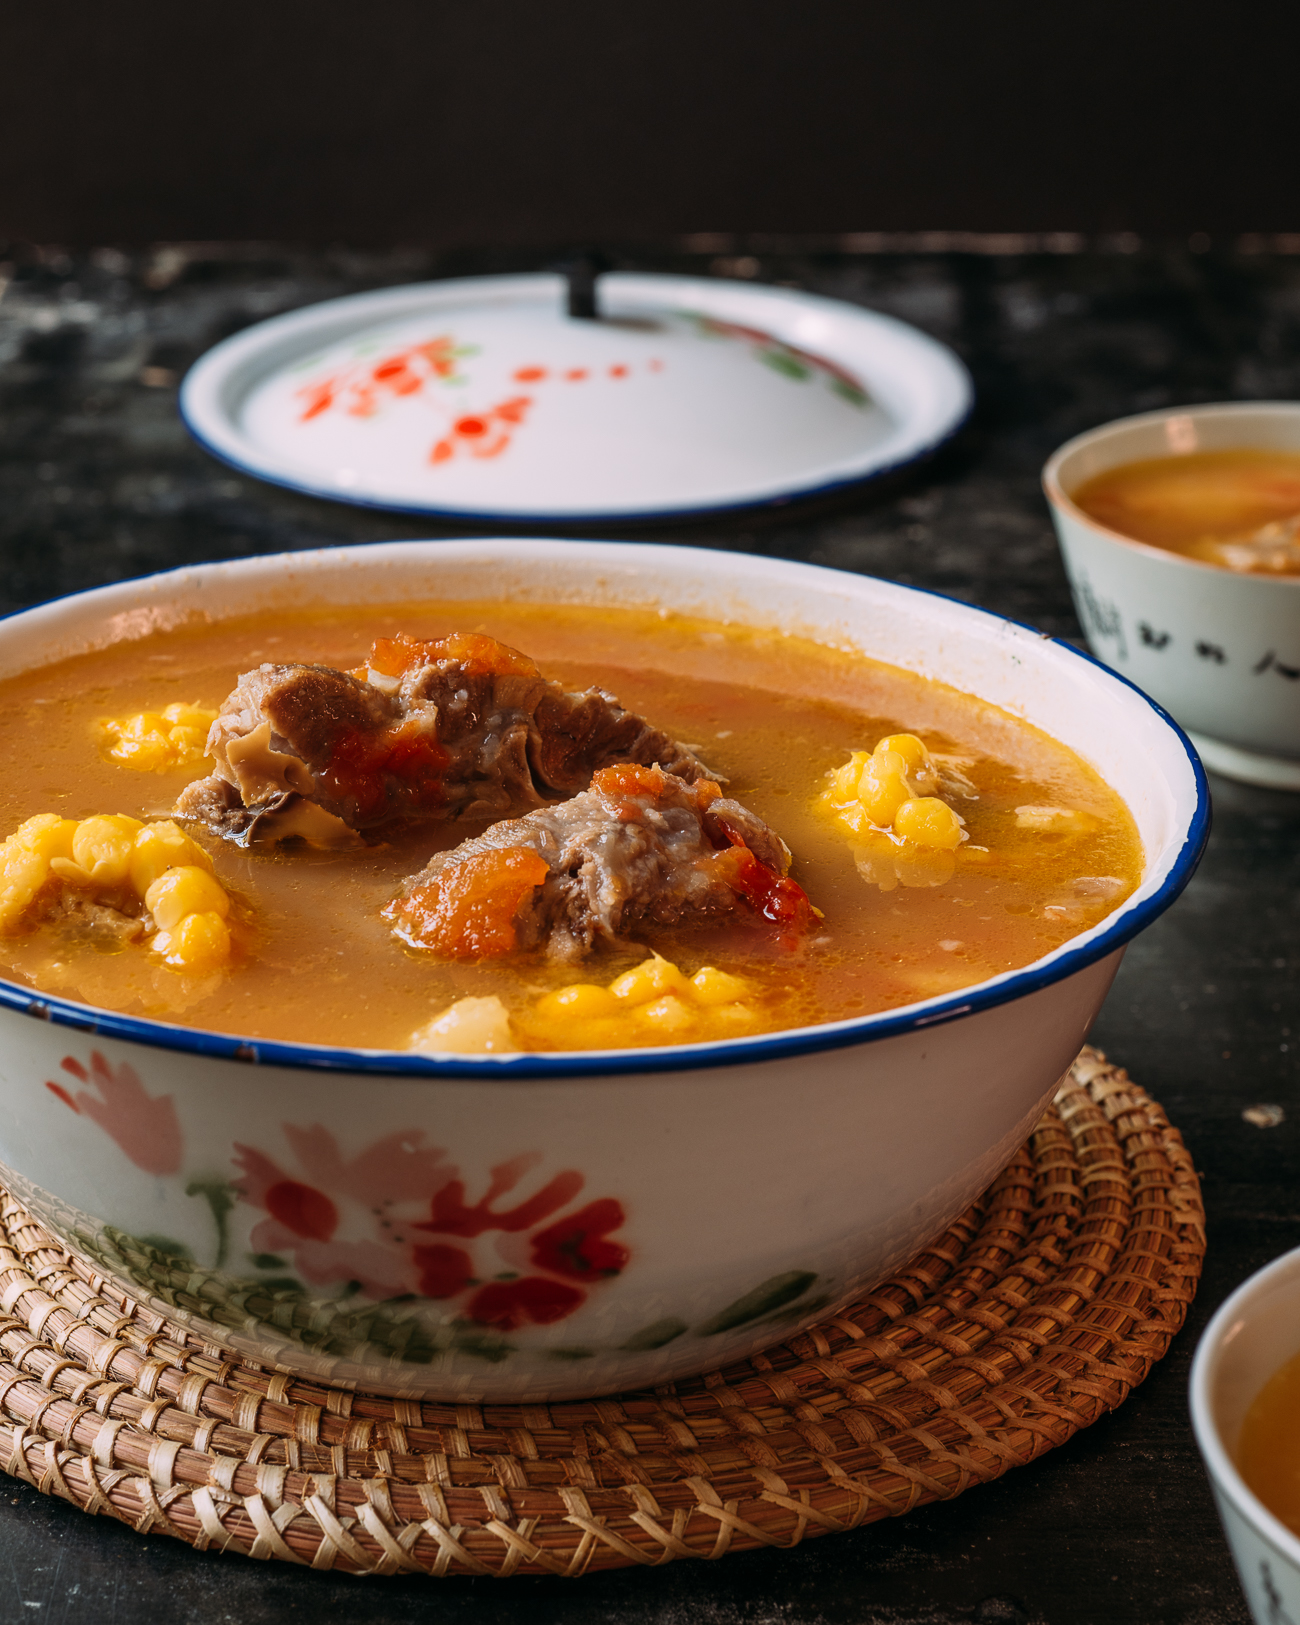 Chinese Pork Bone Soup with Tomatoes, Potatoes, and Corn